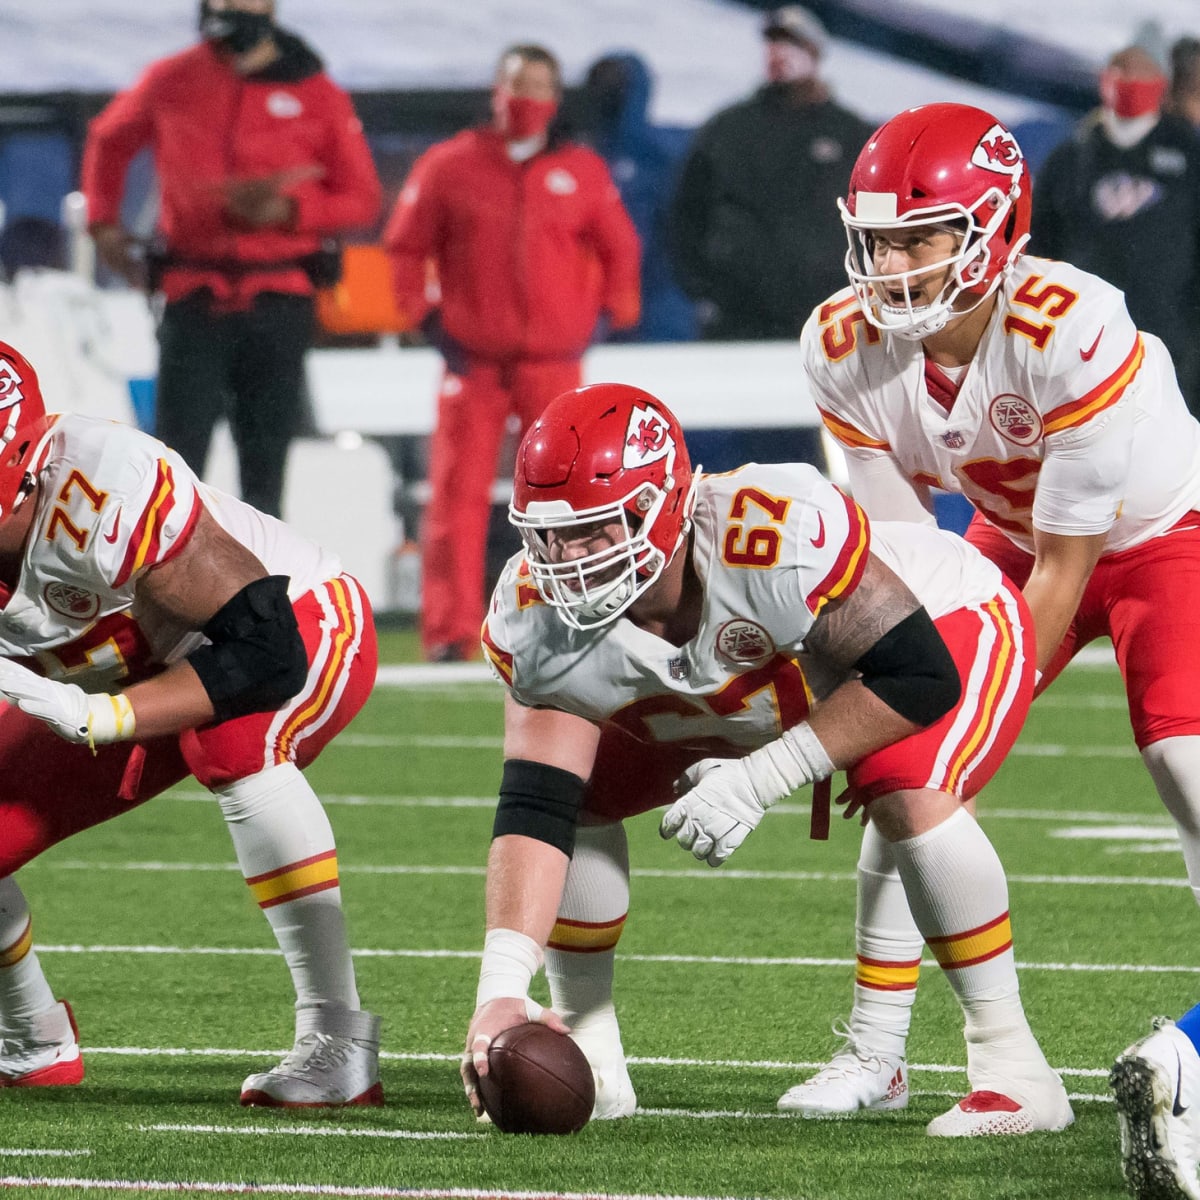 Barber giving Chiefs players haircuts tests positive for coronavirus